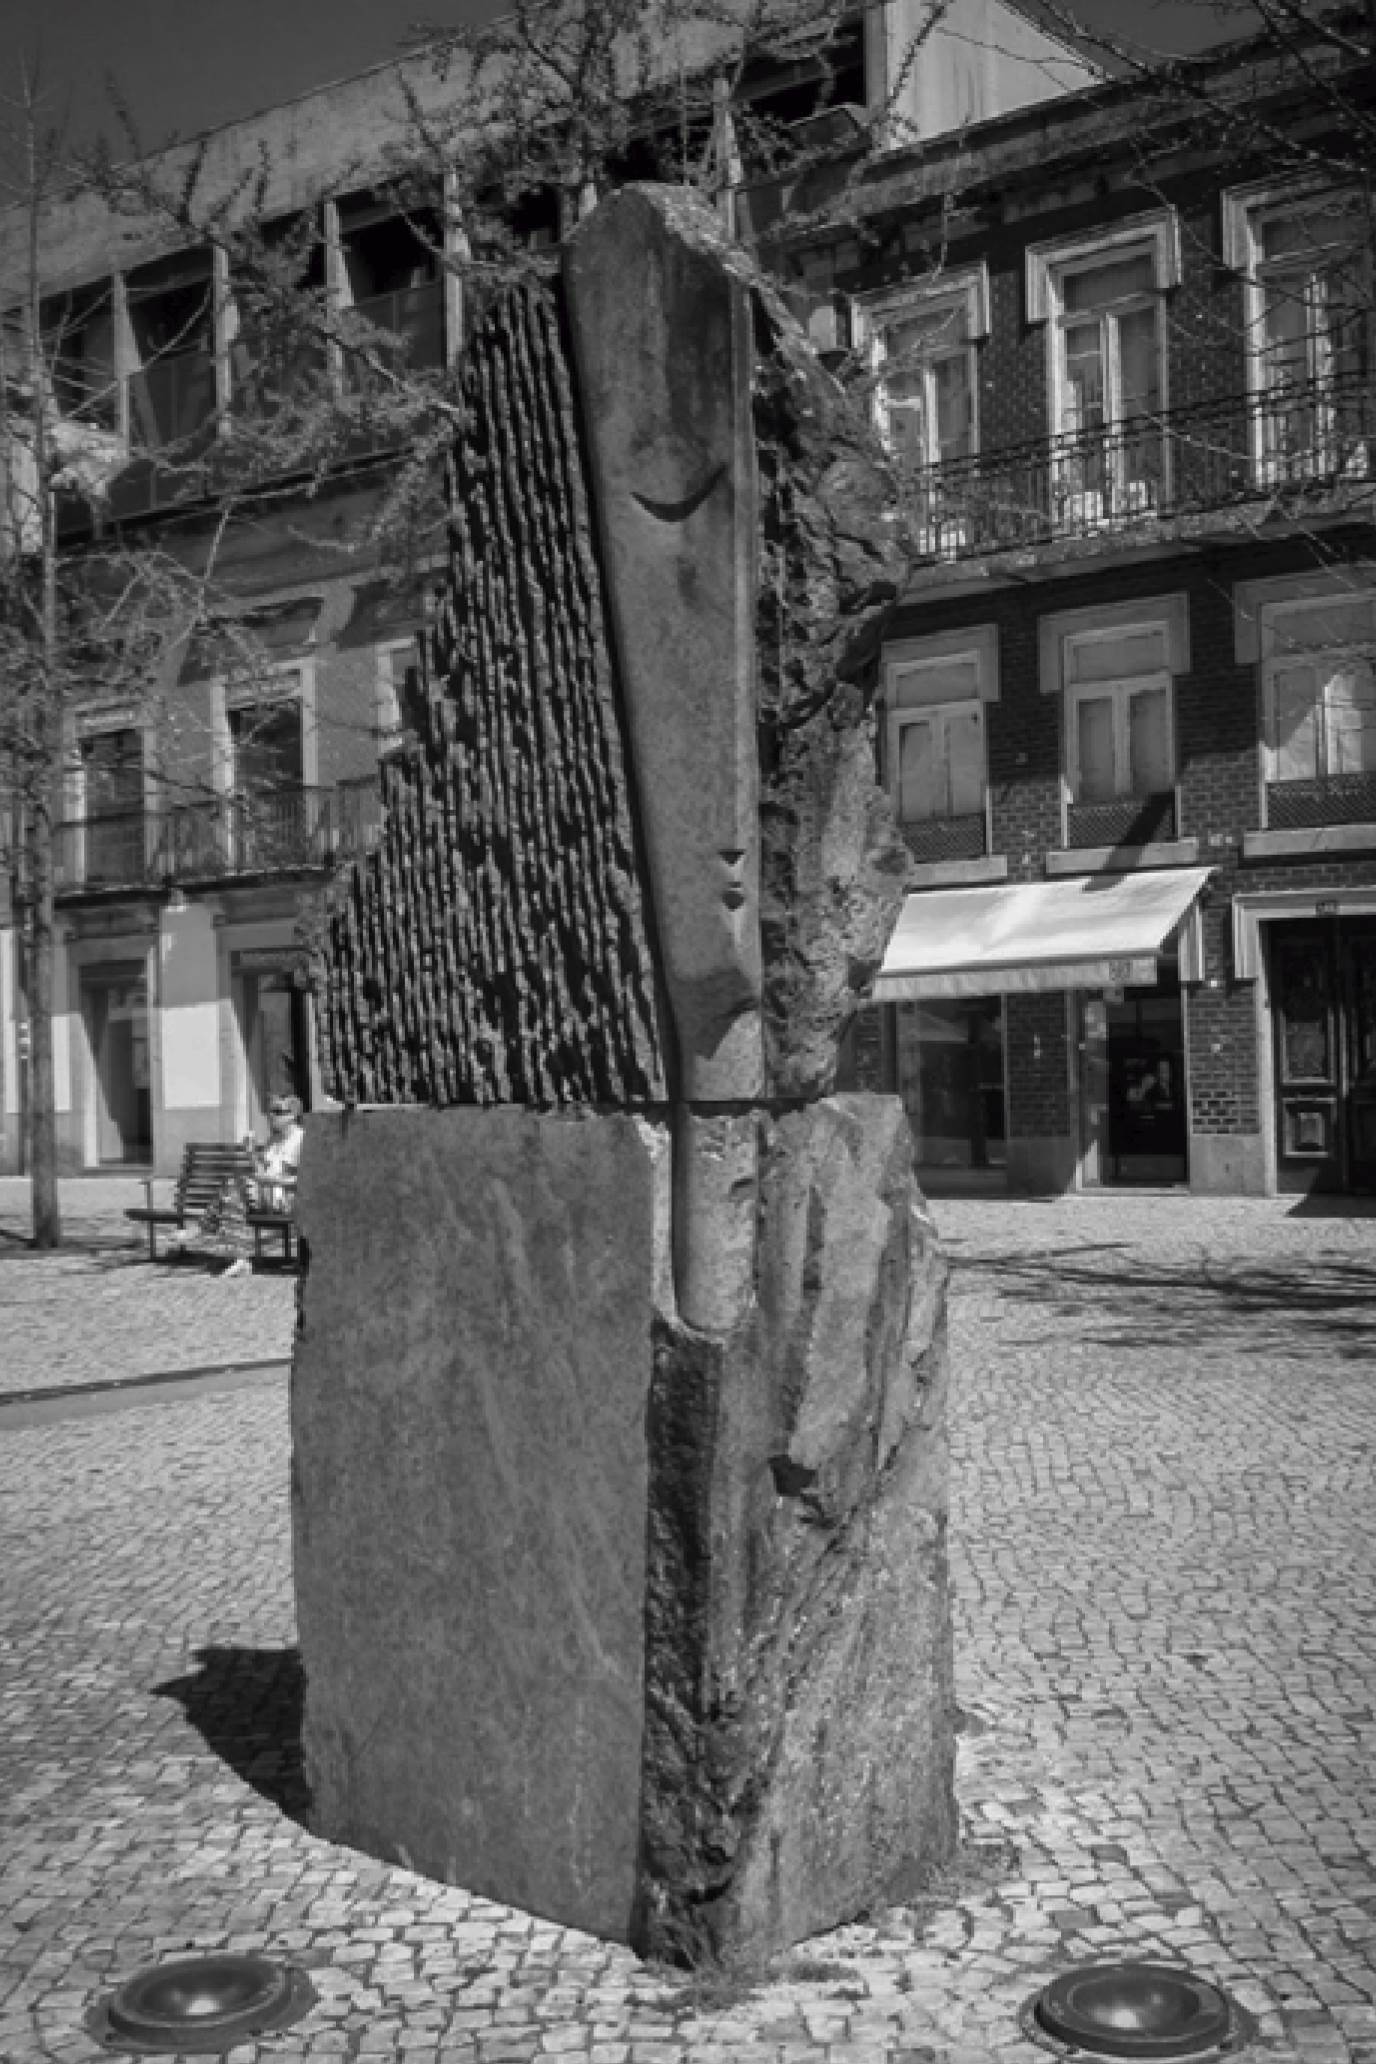 The two sculptural elements, which make up a set, are characterised by four stone blocks superimposed two by two and arranged vertically, suggesting two animal forms, abstract, in confrontation.  The work has the language that characterises the artist, with the grooves contrasting with the rusticity of the stone. 
The work was originally placed in Conde de Agrolongo Square, at the intersection of Capelistas Street and Doutor Justino Cruz Street, but has since been removed and is awaiting a new location.